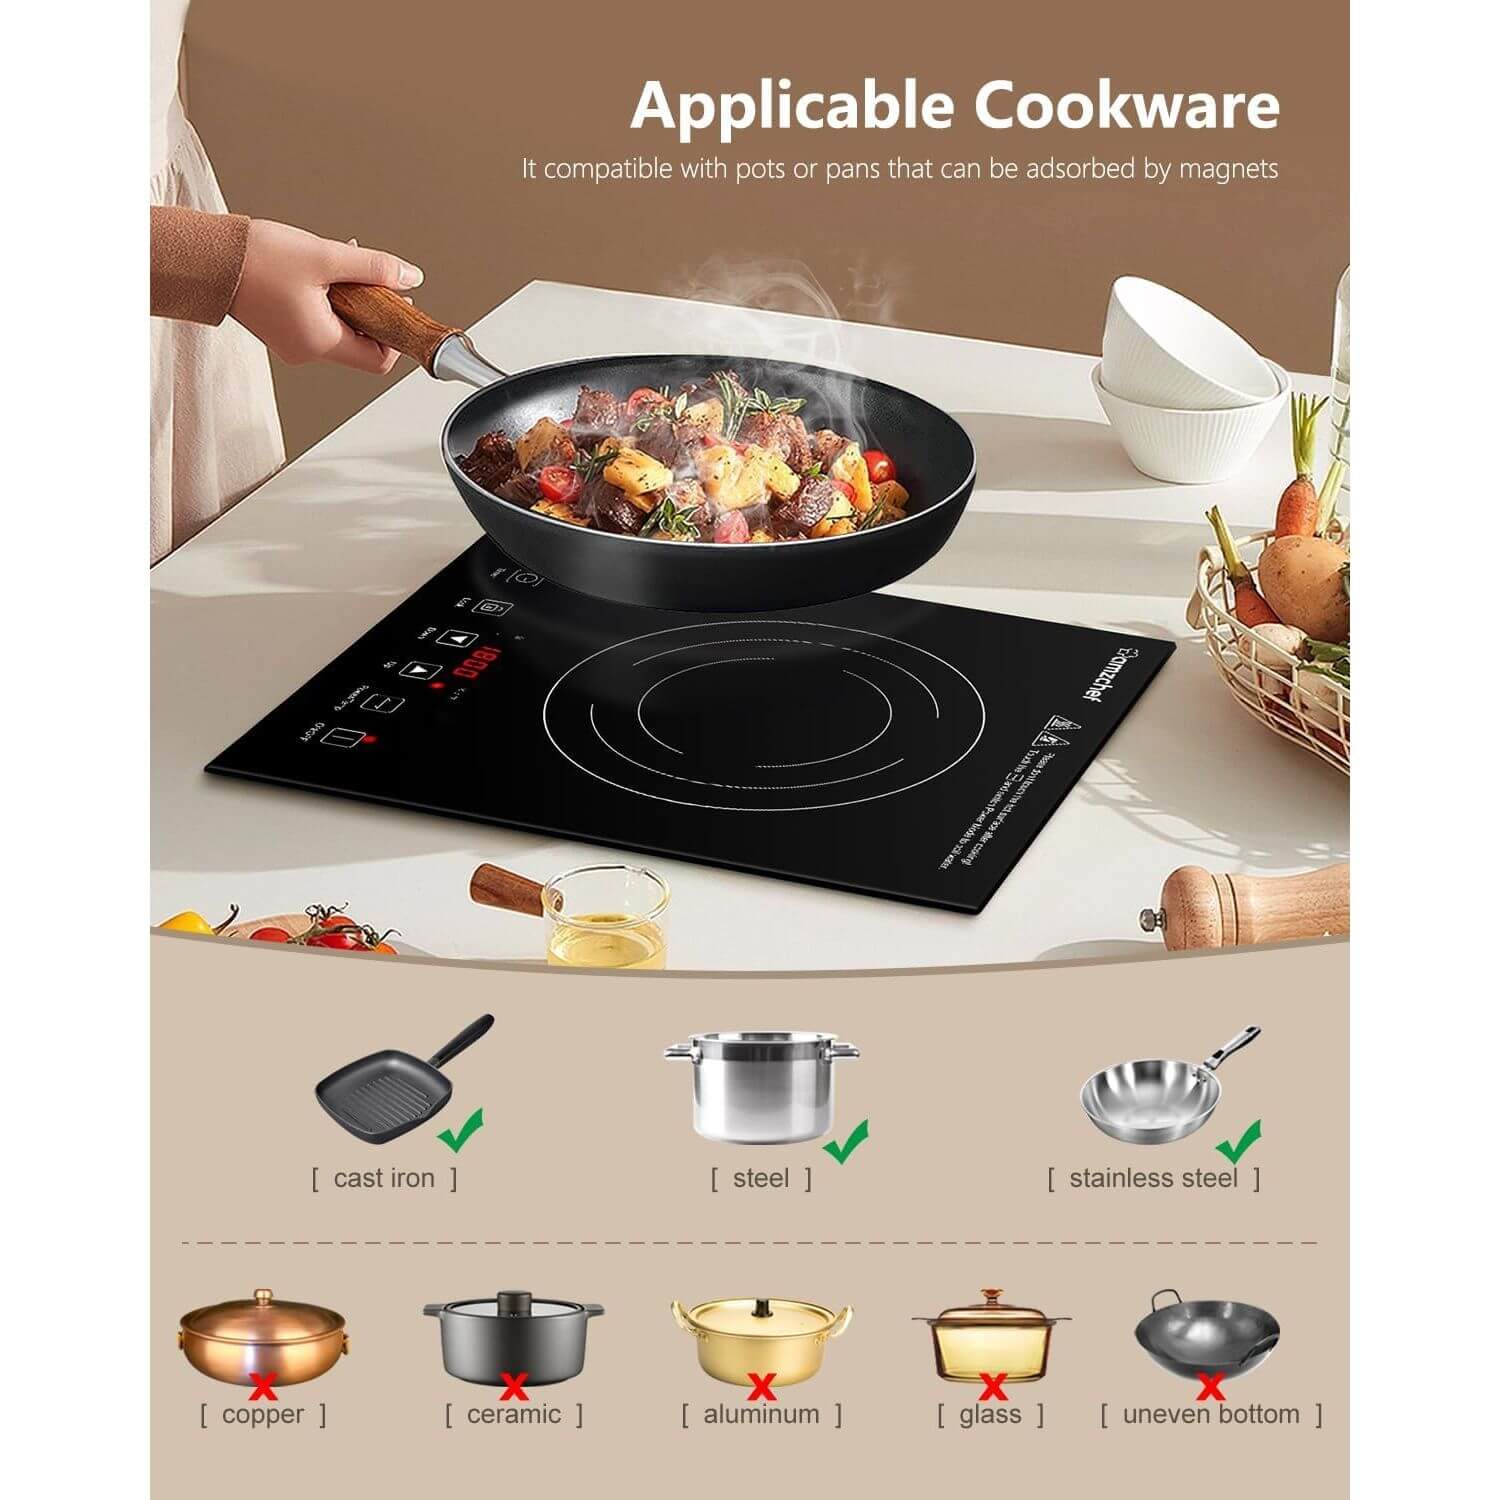 AMZCHEF Induction Cooktop Portable 1800W for RV